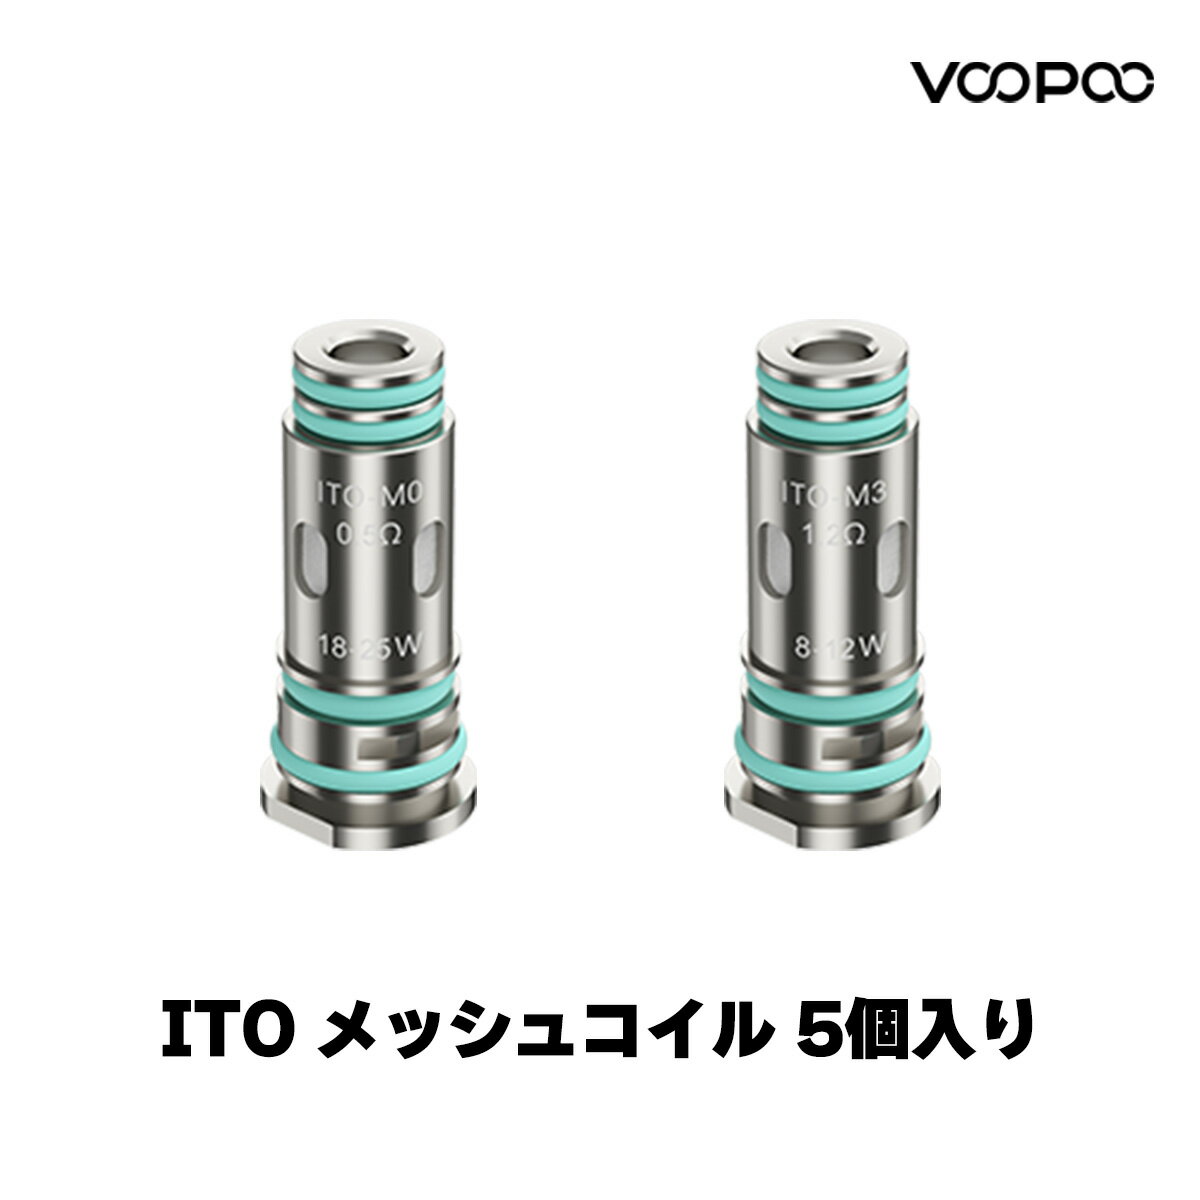 VooPoo ITO メッシュコイル 5個入り M0 M